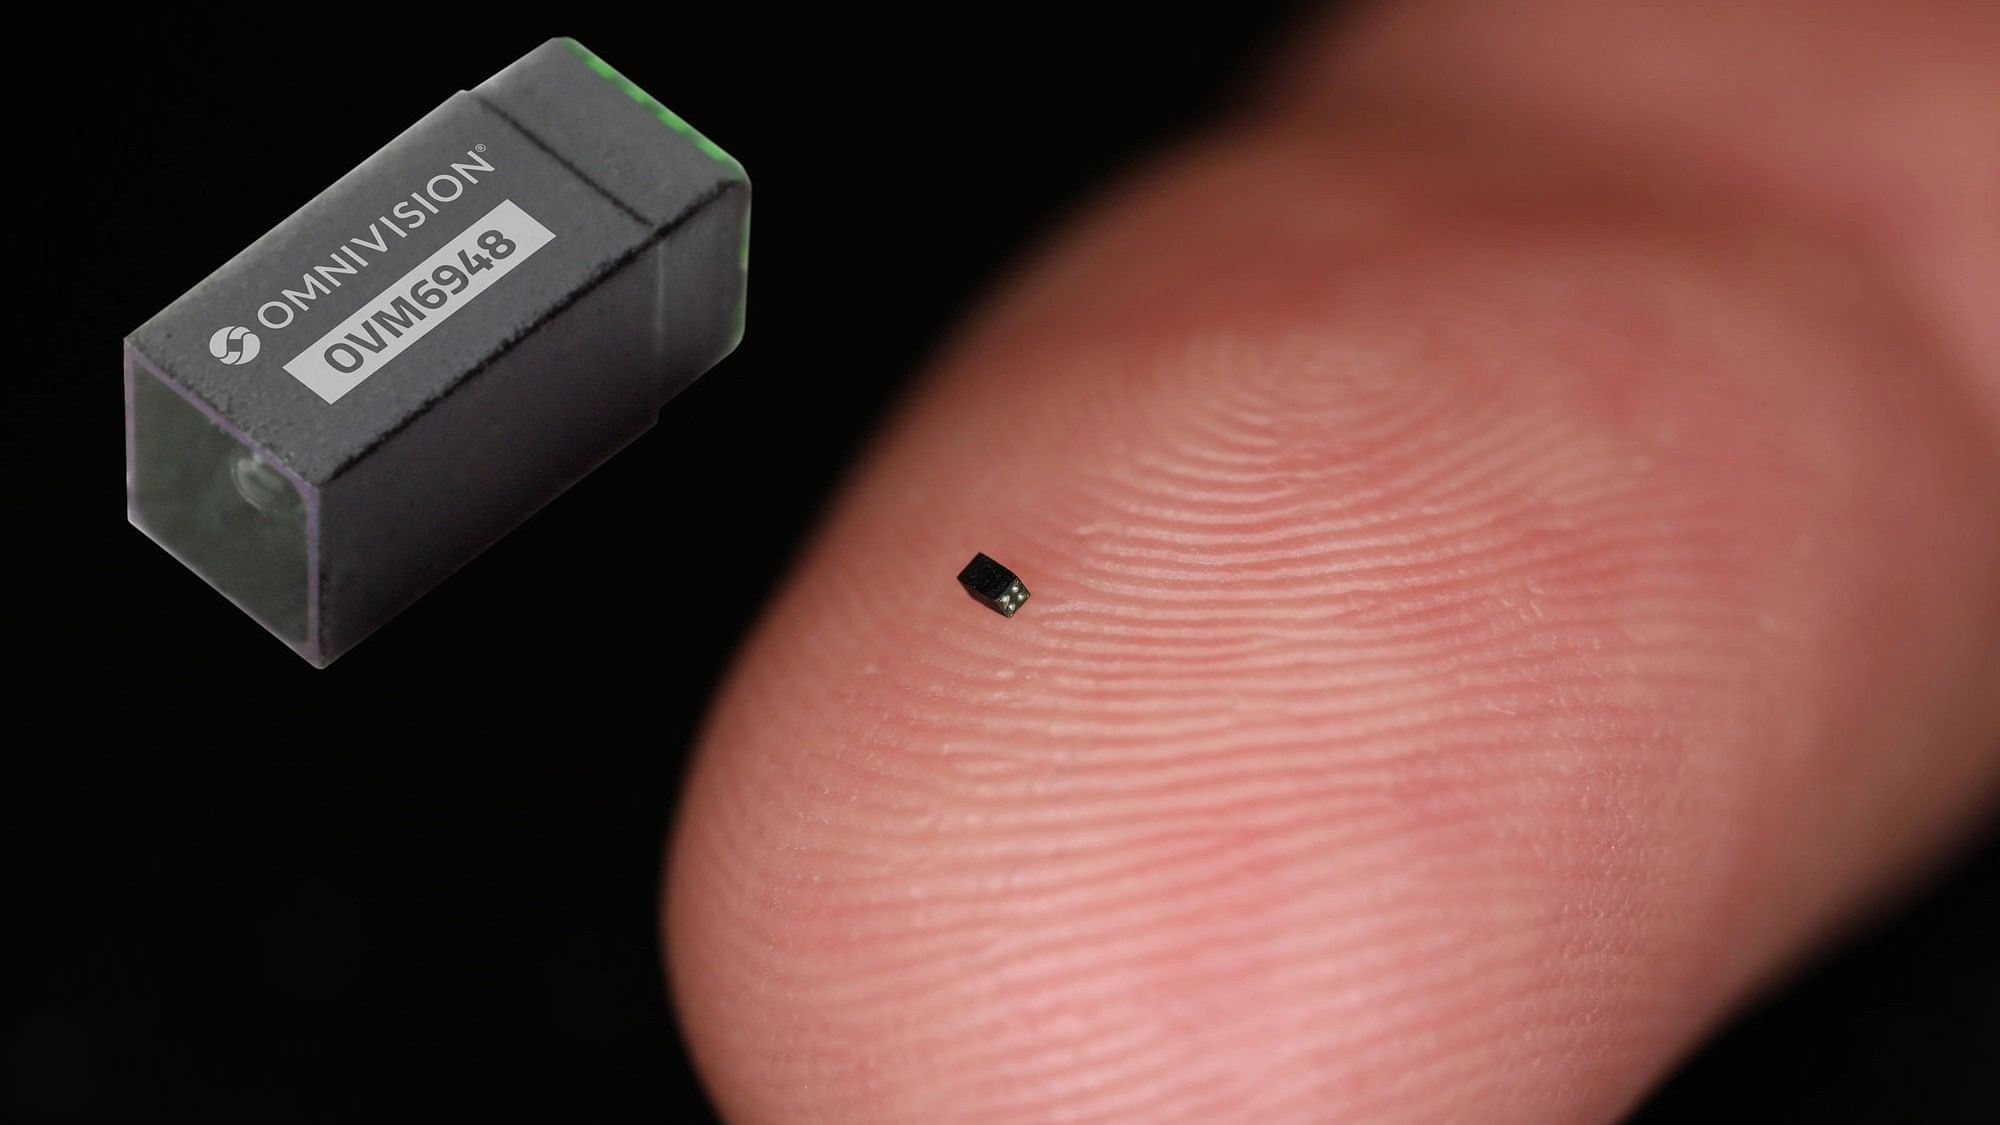 <div class="paragraphs"><p><a href="https://www.ovt.com/press-releases/omnivision-announces-guinness-world-record-for-smallest-image-sensor-and-new-miniature-camera-module-for-disposable-medical-applications/" rel="nofollow">OmniVision</a>'s&nbsp;OV6948, world's smallest camera.</p></div>